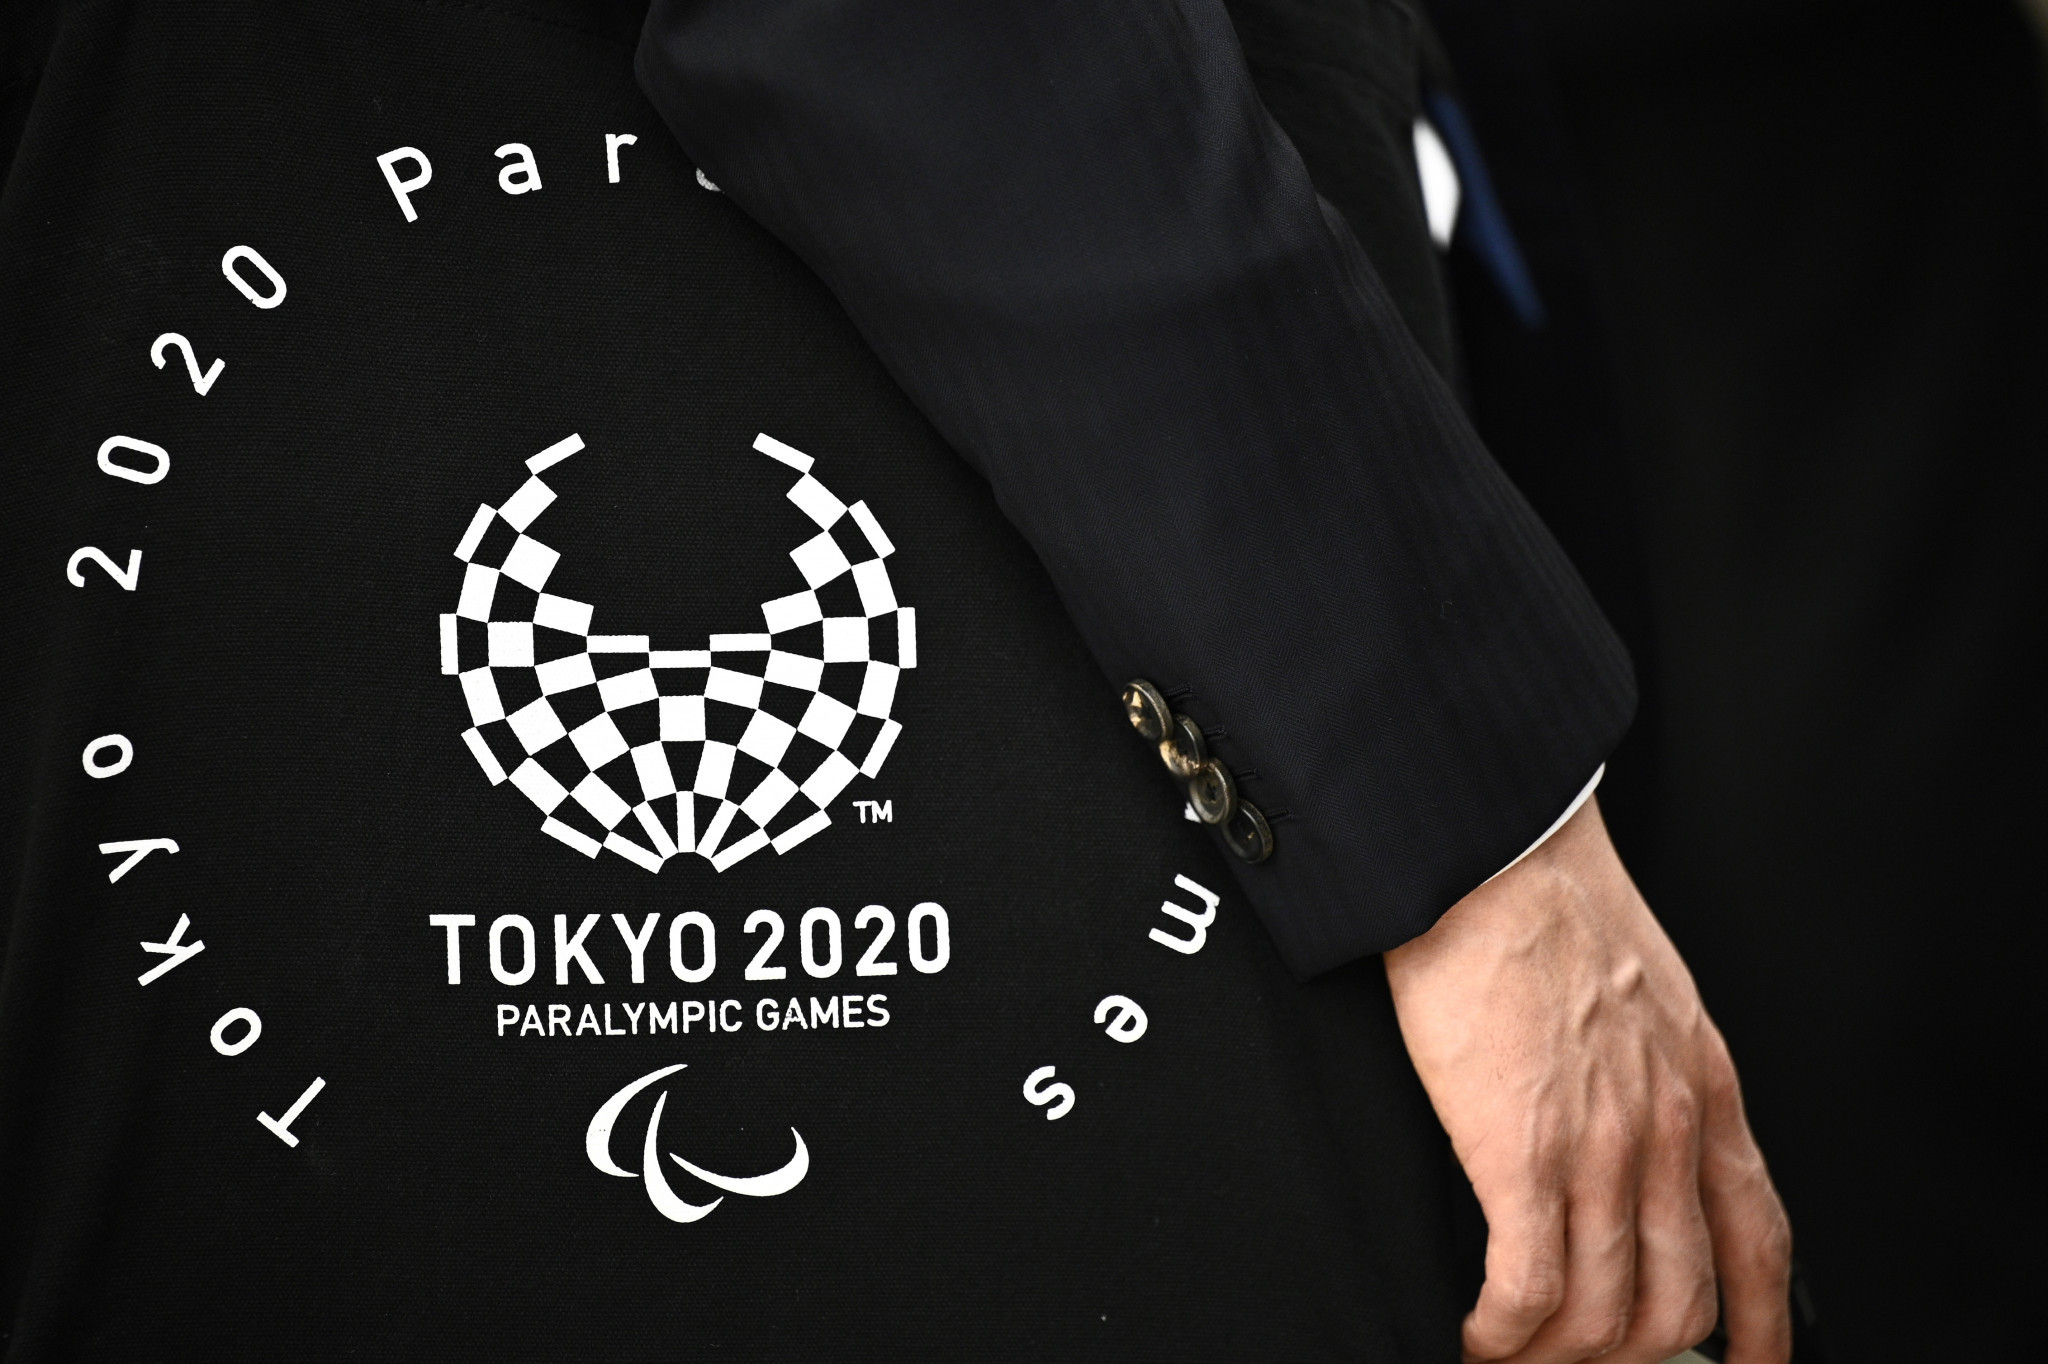 Japanese Paralympic groups reportedly hold concerns over Tokyo 2020